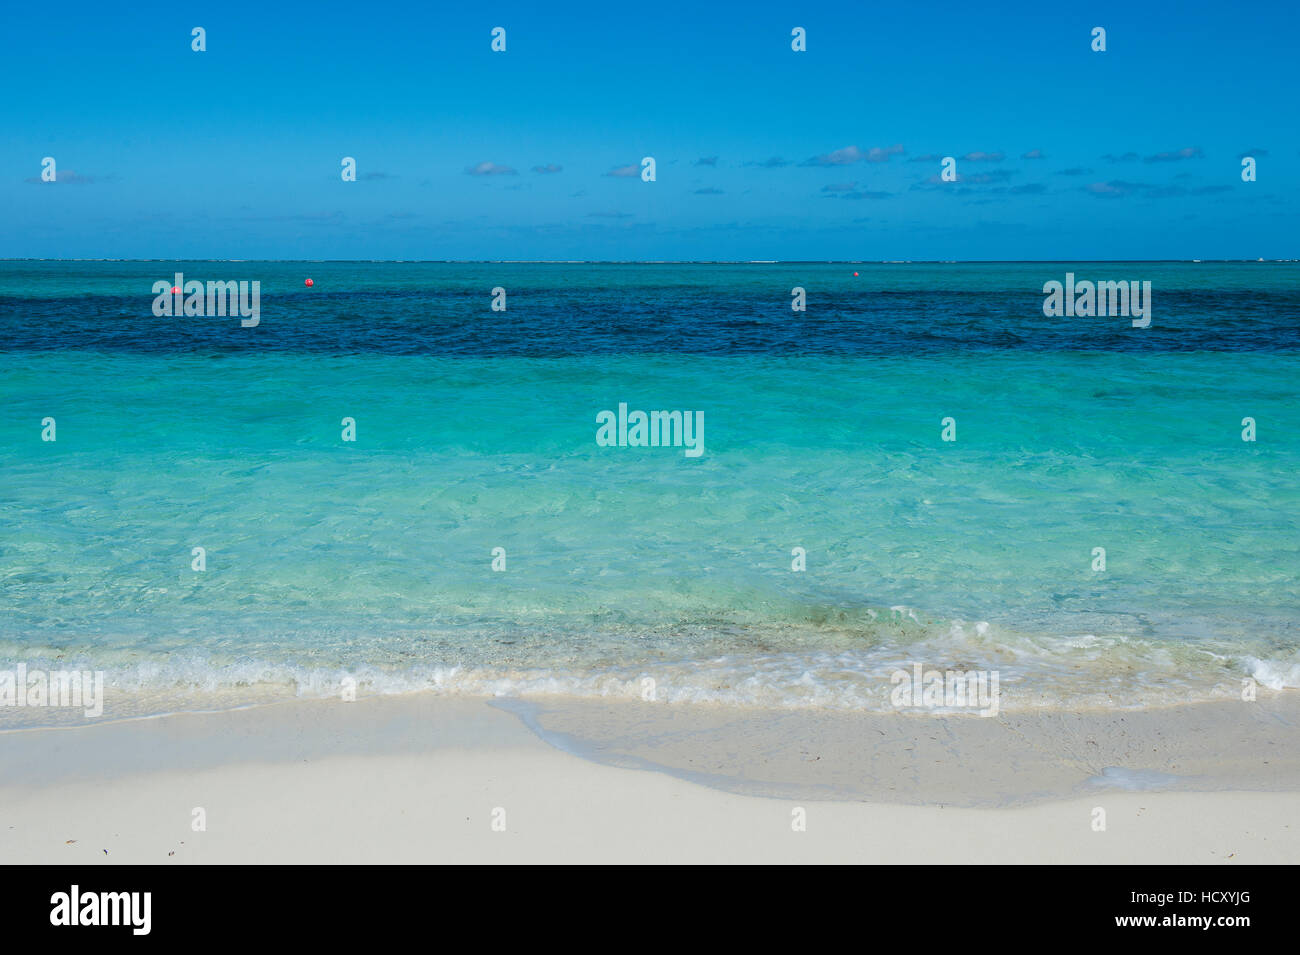 White sand and turquoise water on world famous Grace Bay beach, Providenciales, Turks and Caicos, Caribbean Stock Photo